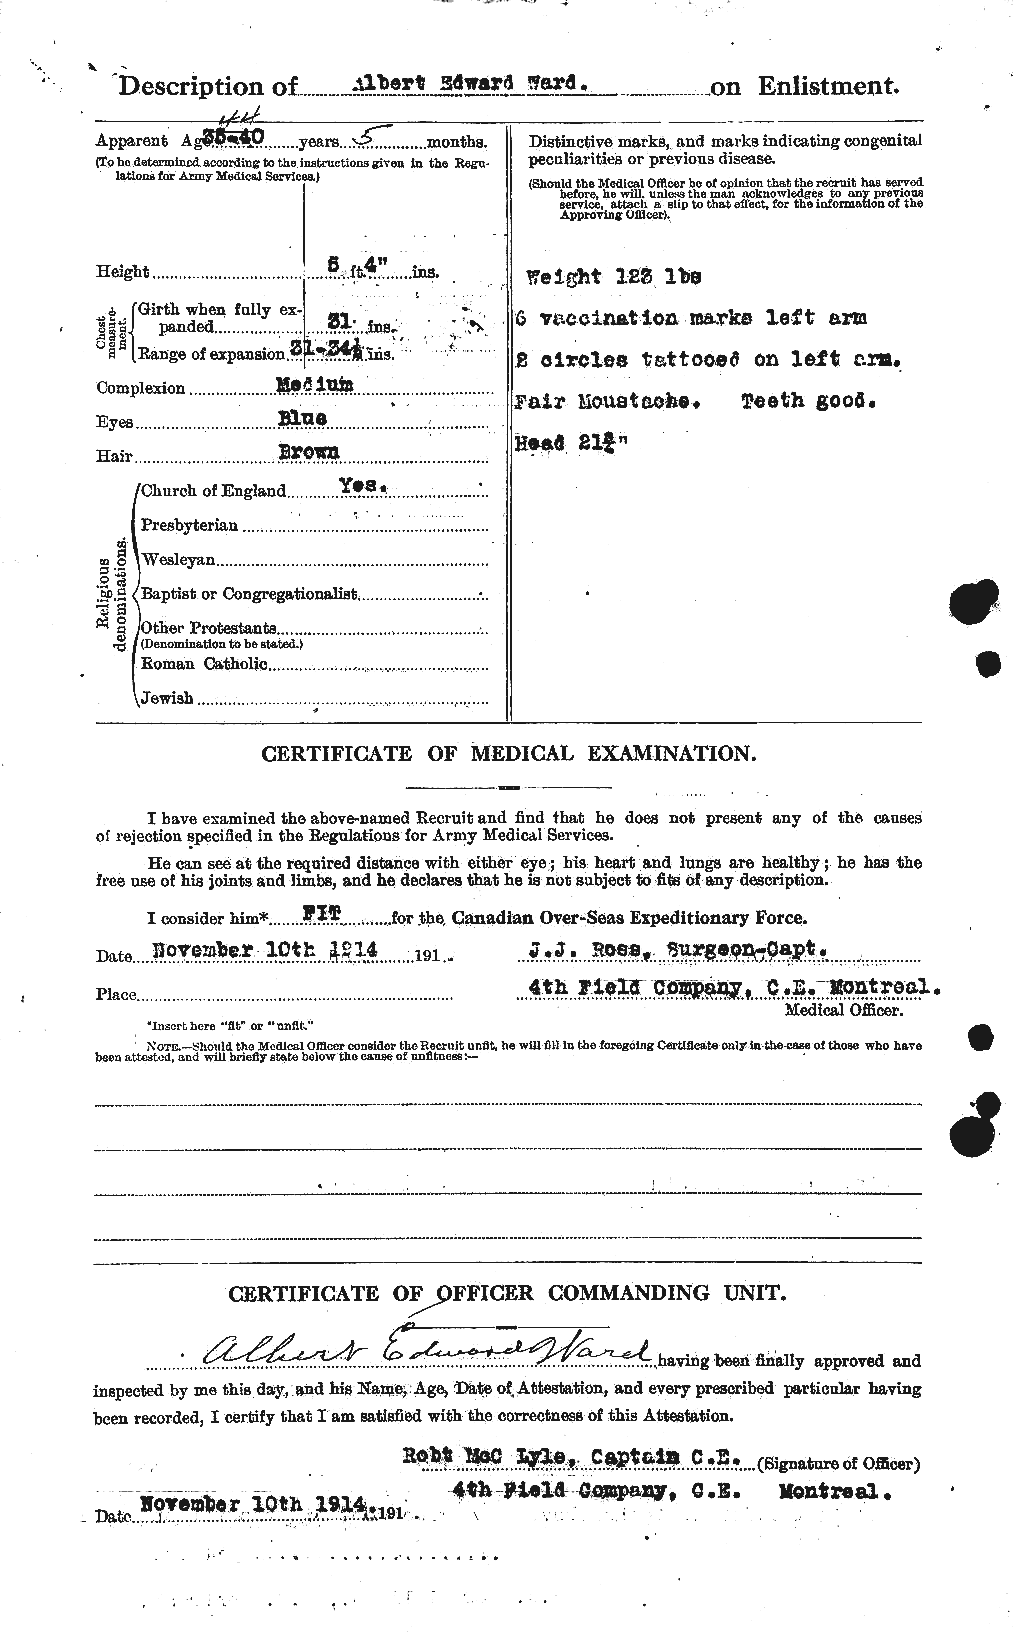 Personnel Records of the First World War - CEF 655093b